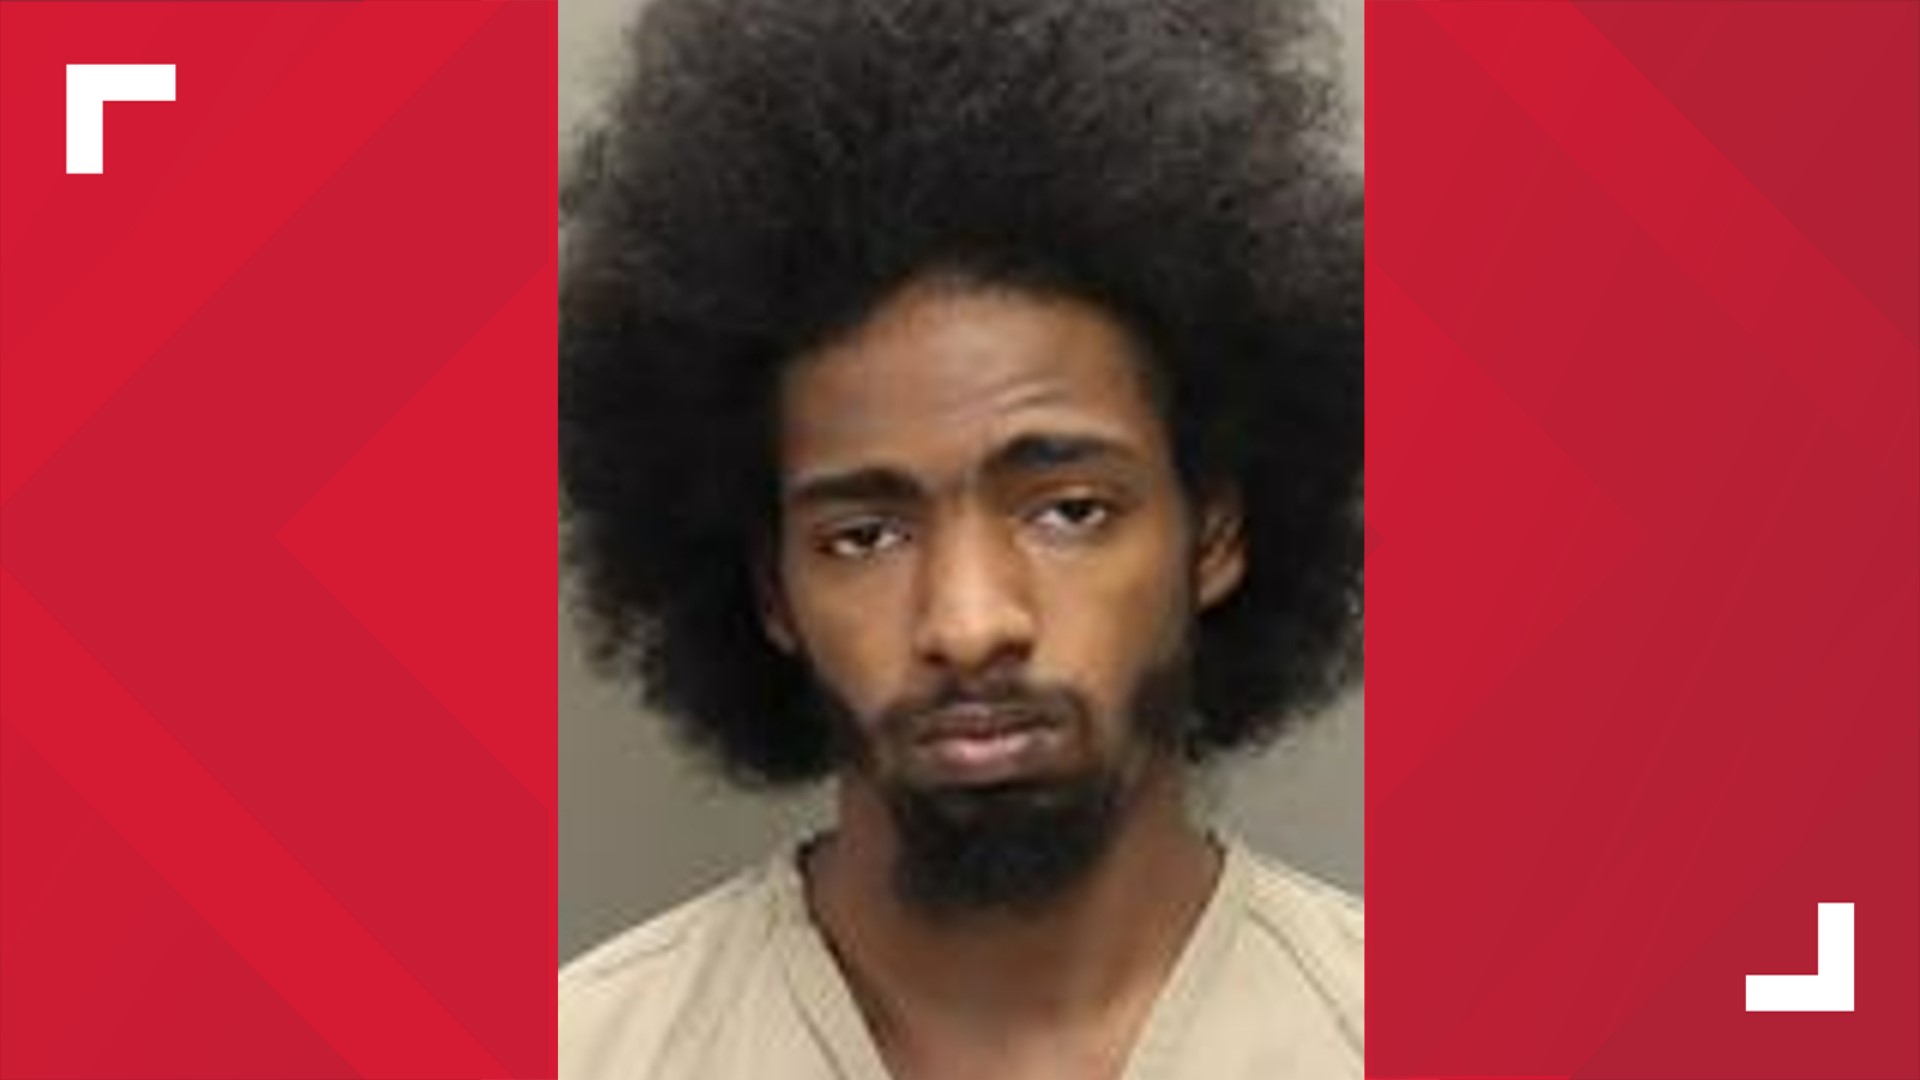 Police arrested 28-year-old Terell Stokes on Thursday and charged him with one count of murder. The charge stems from the shooting death of Superia Wilson.